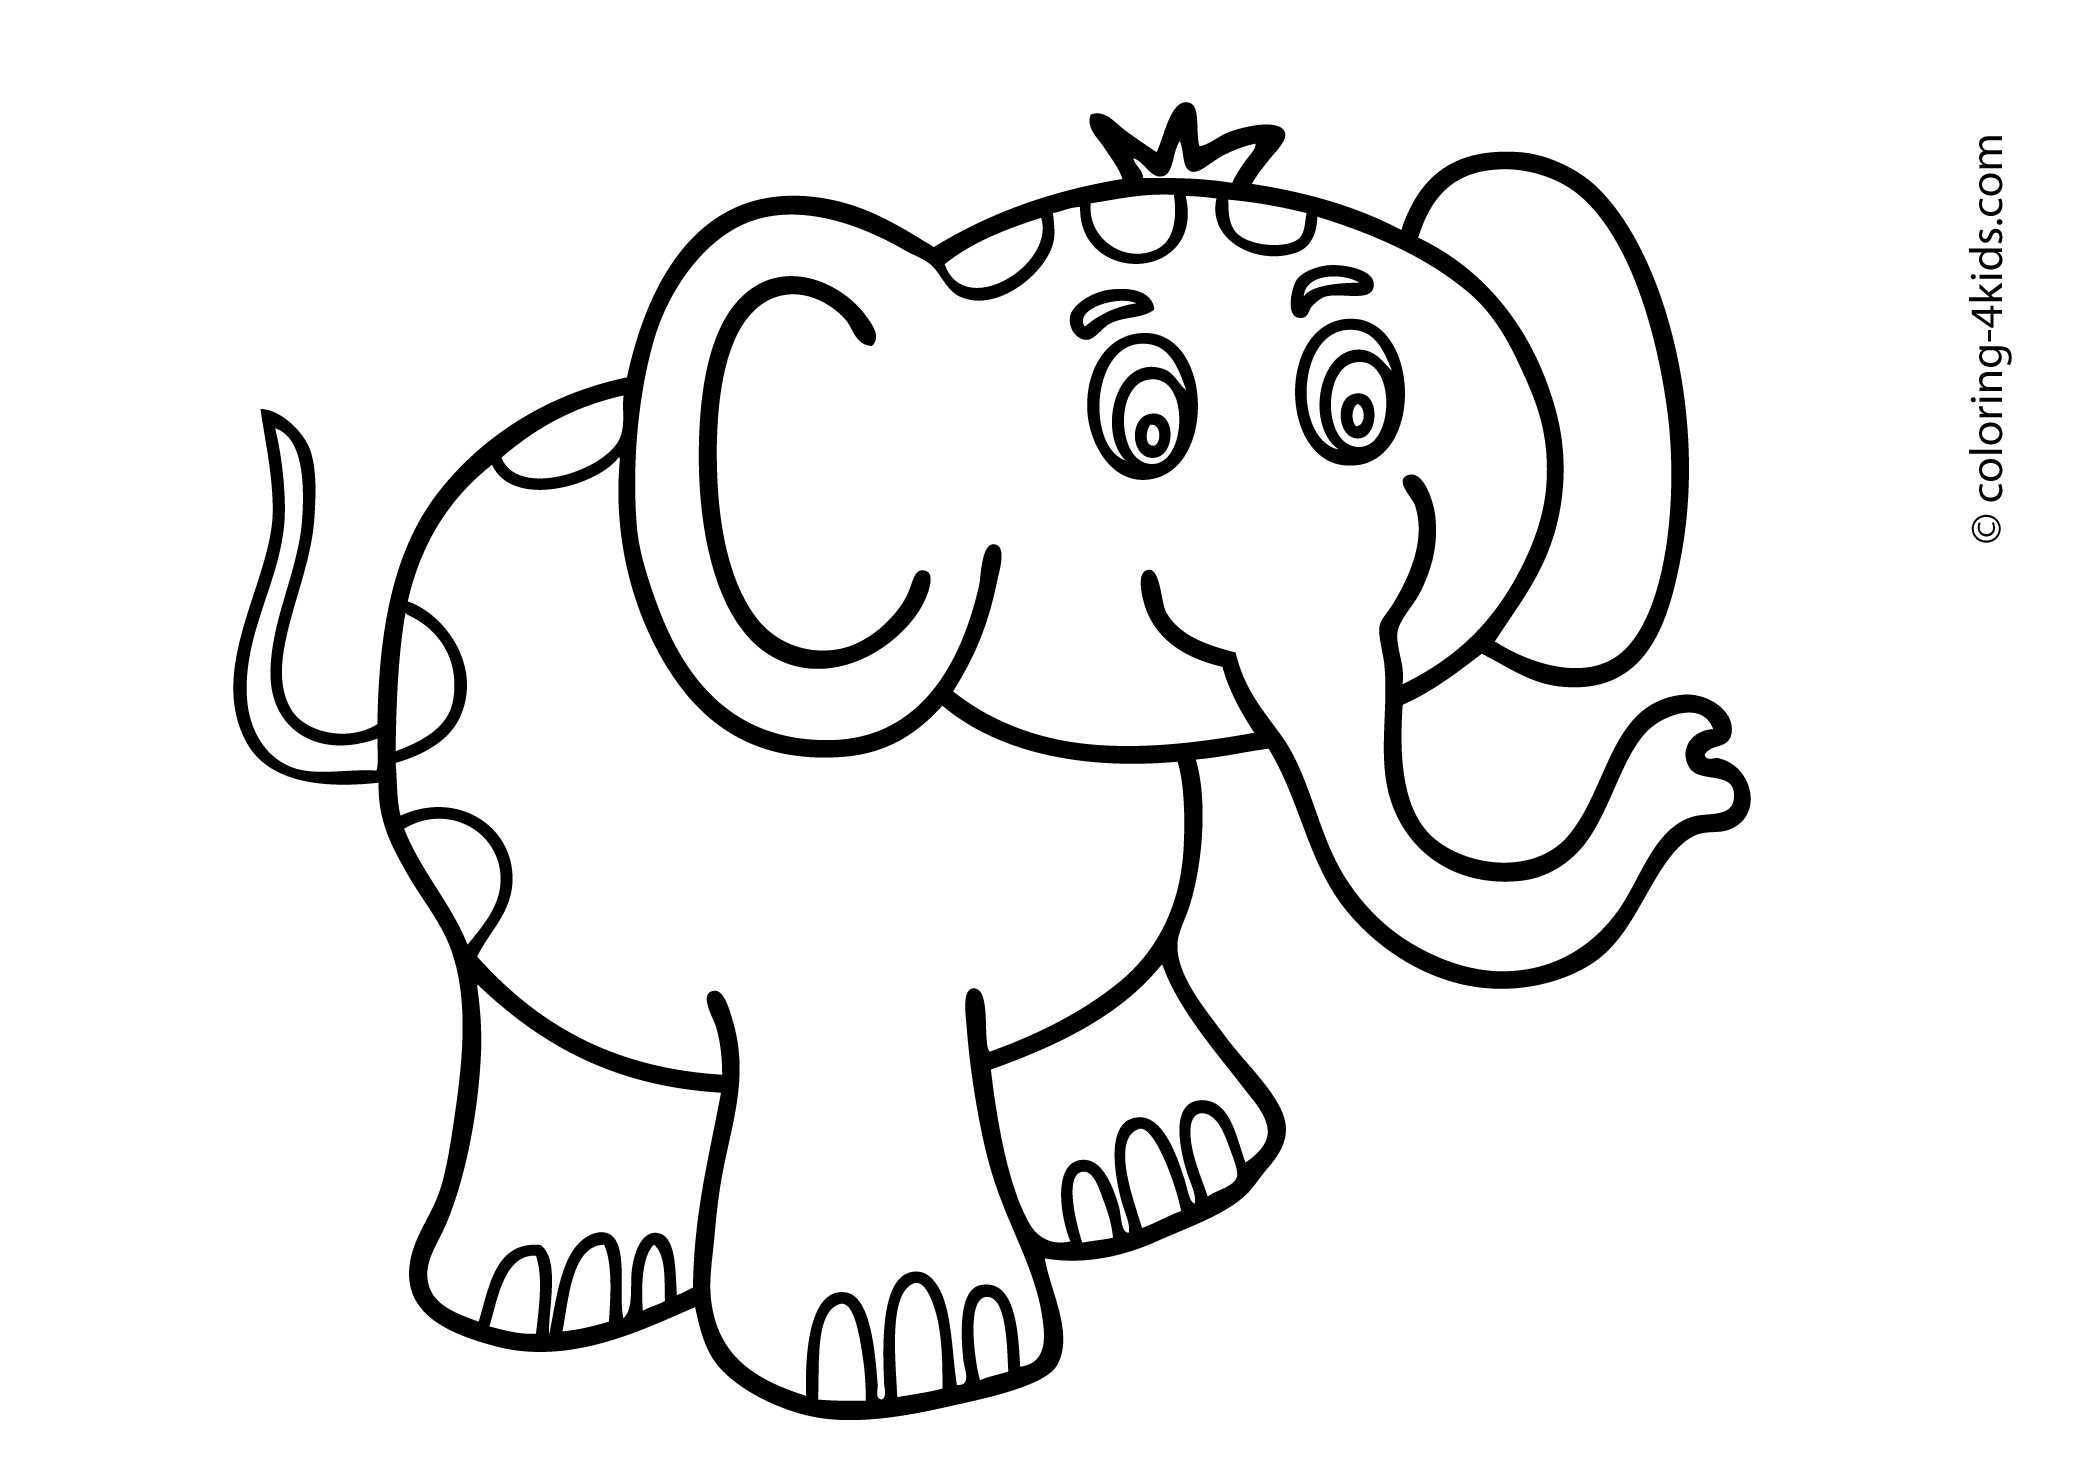 animal picture for kids to color Printable baby animals coloring pages (updated 2021)